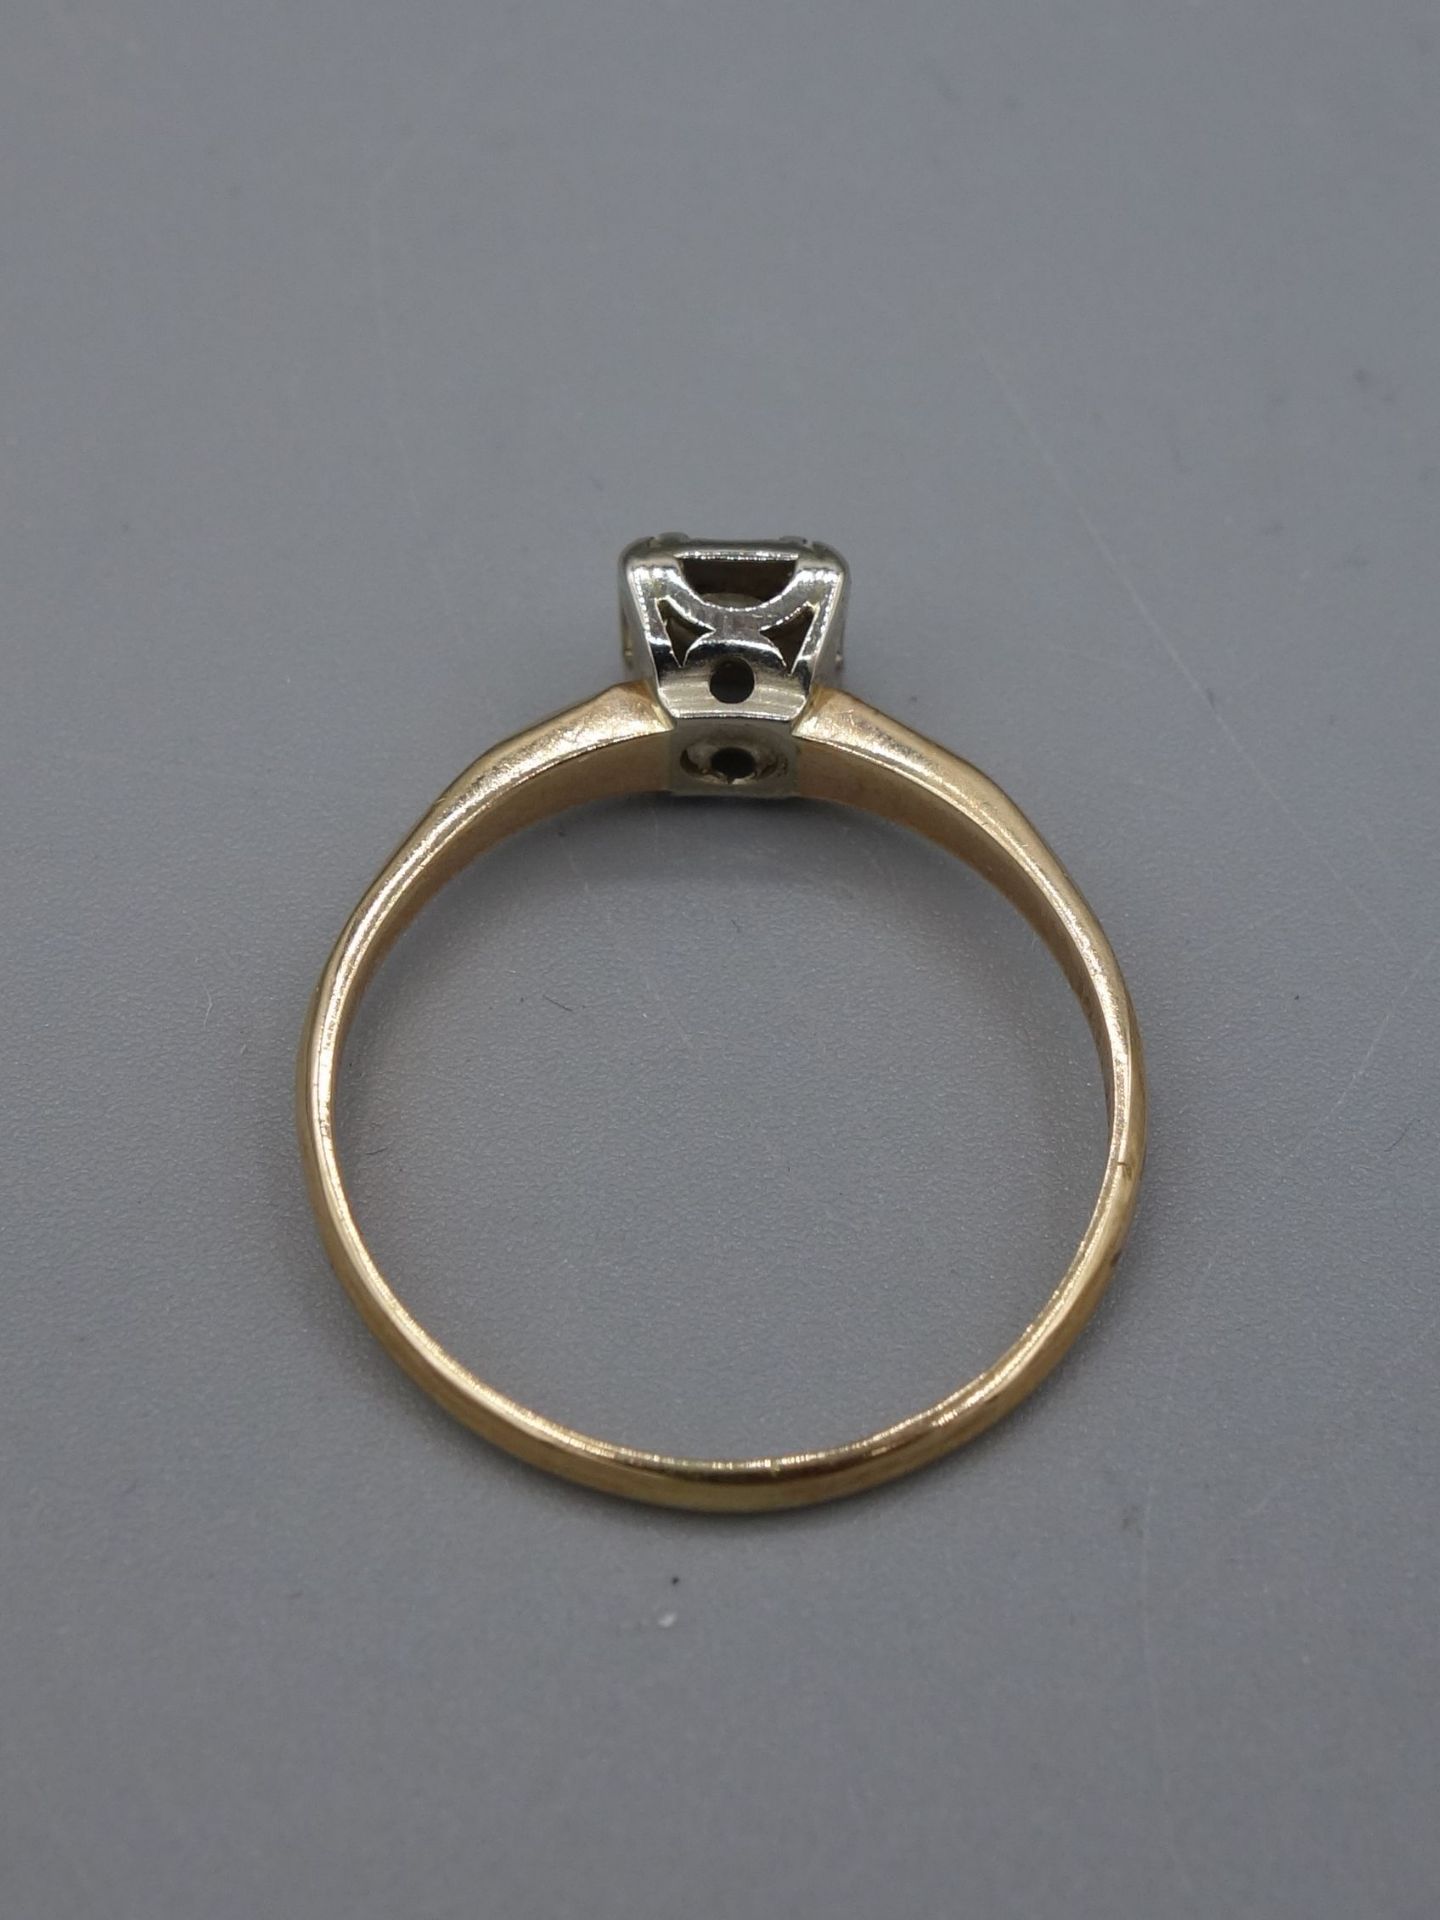 SOLITARY RING - Image 3 of 3